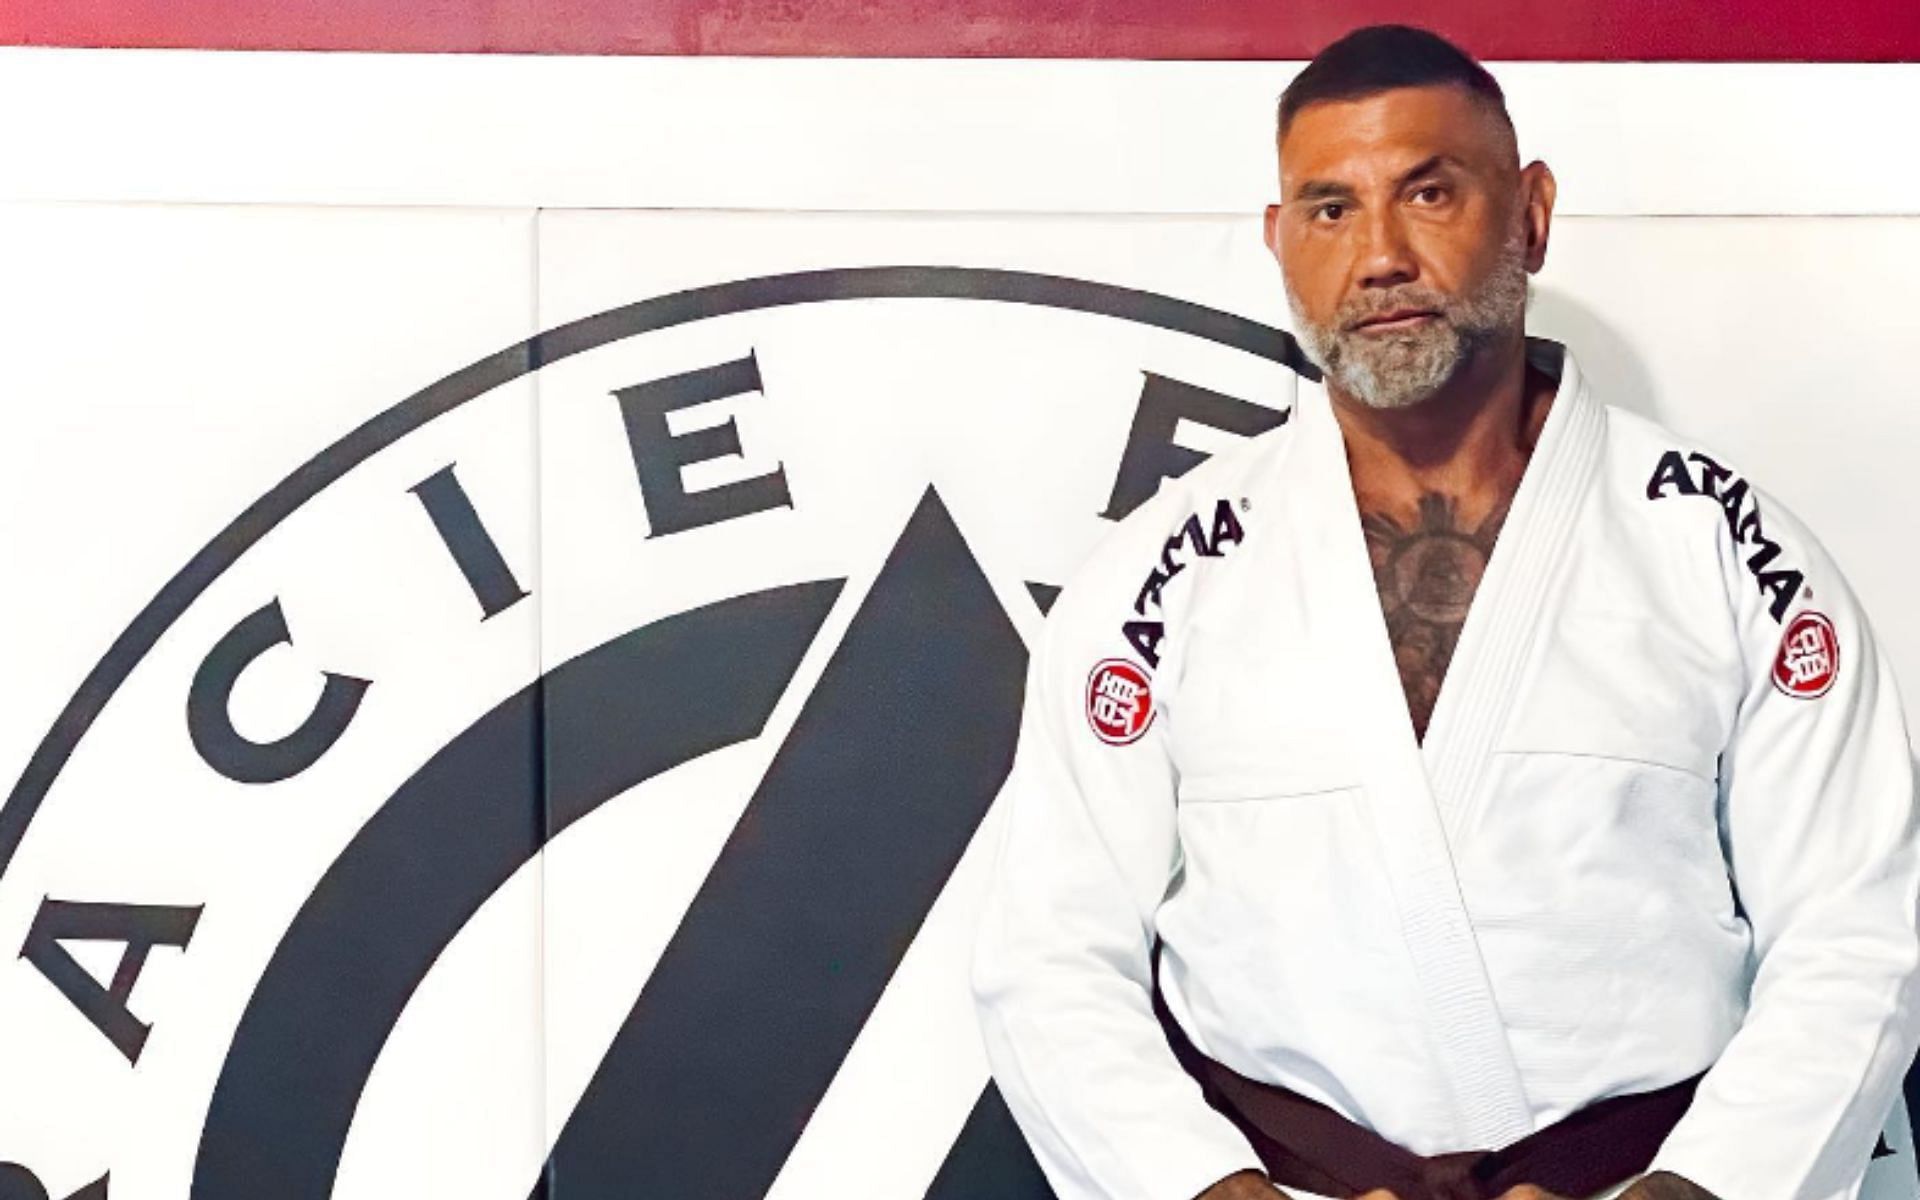 Dave Bautista emotionally reflects on earning brown belt